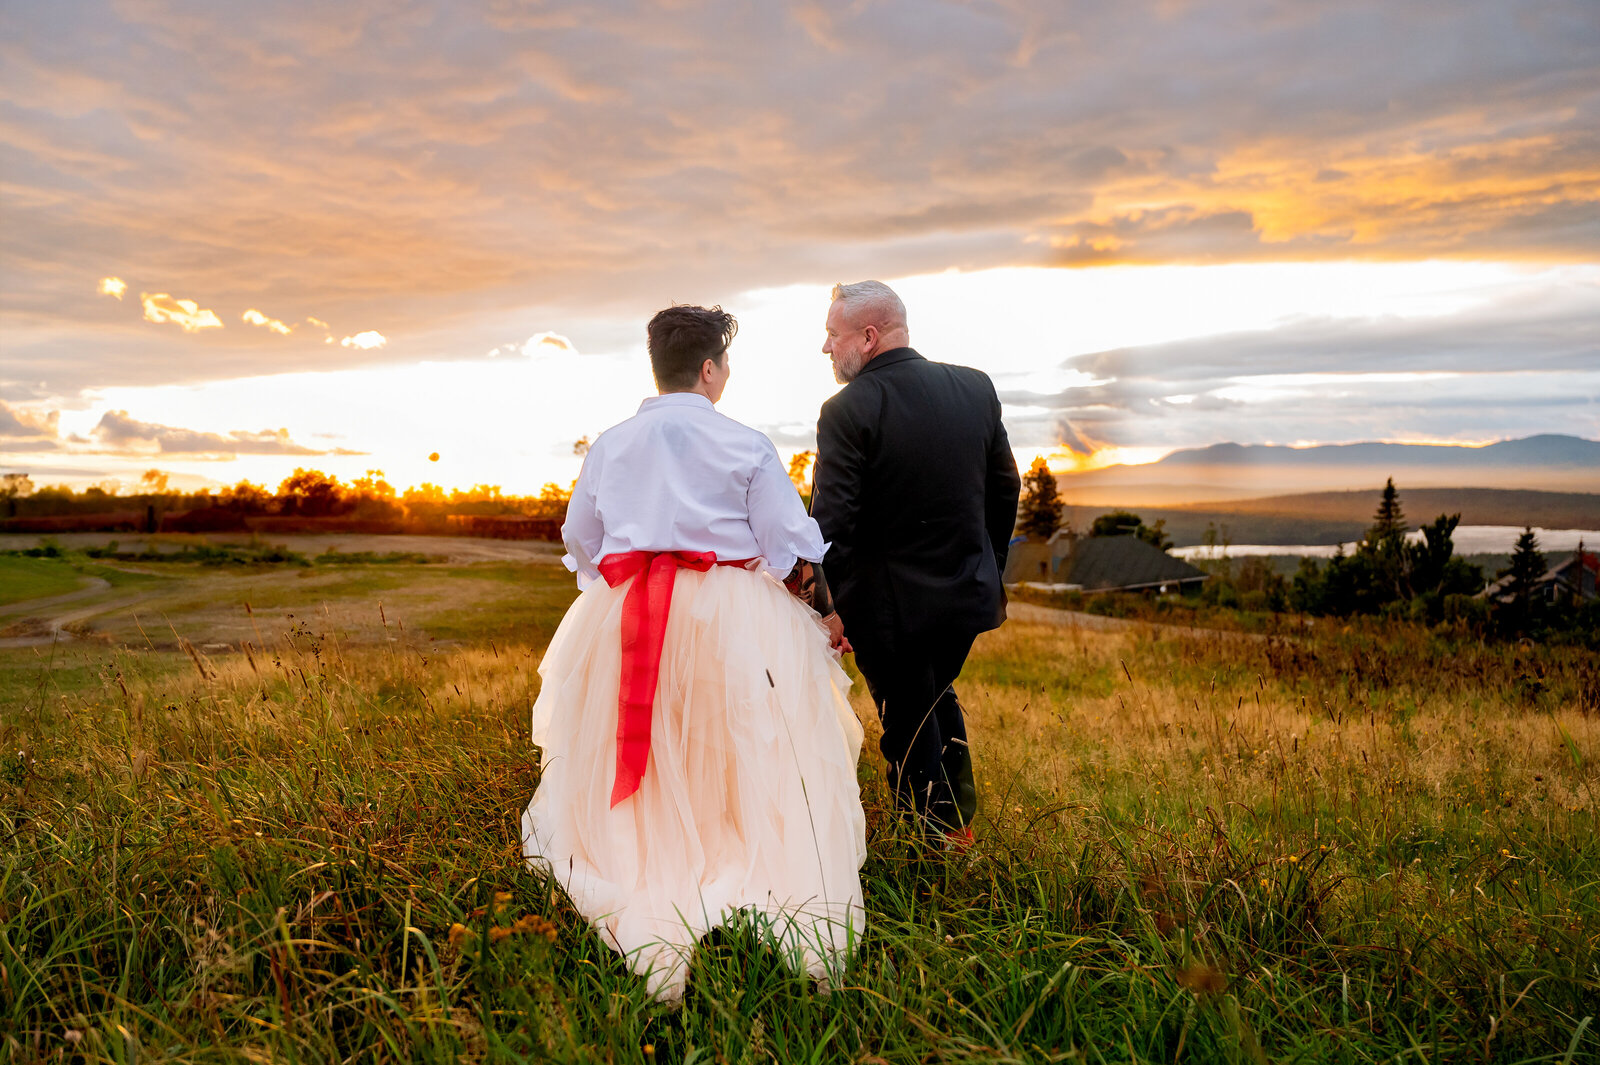 couples wedding portraits during sunset